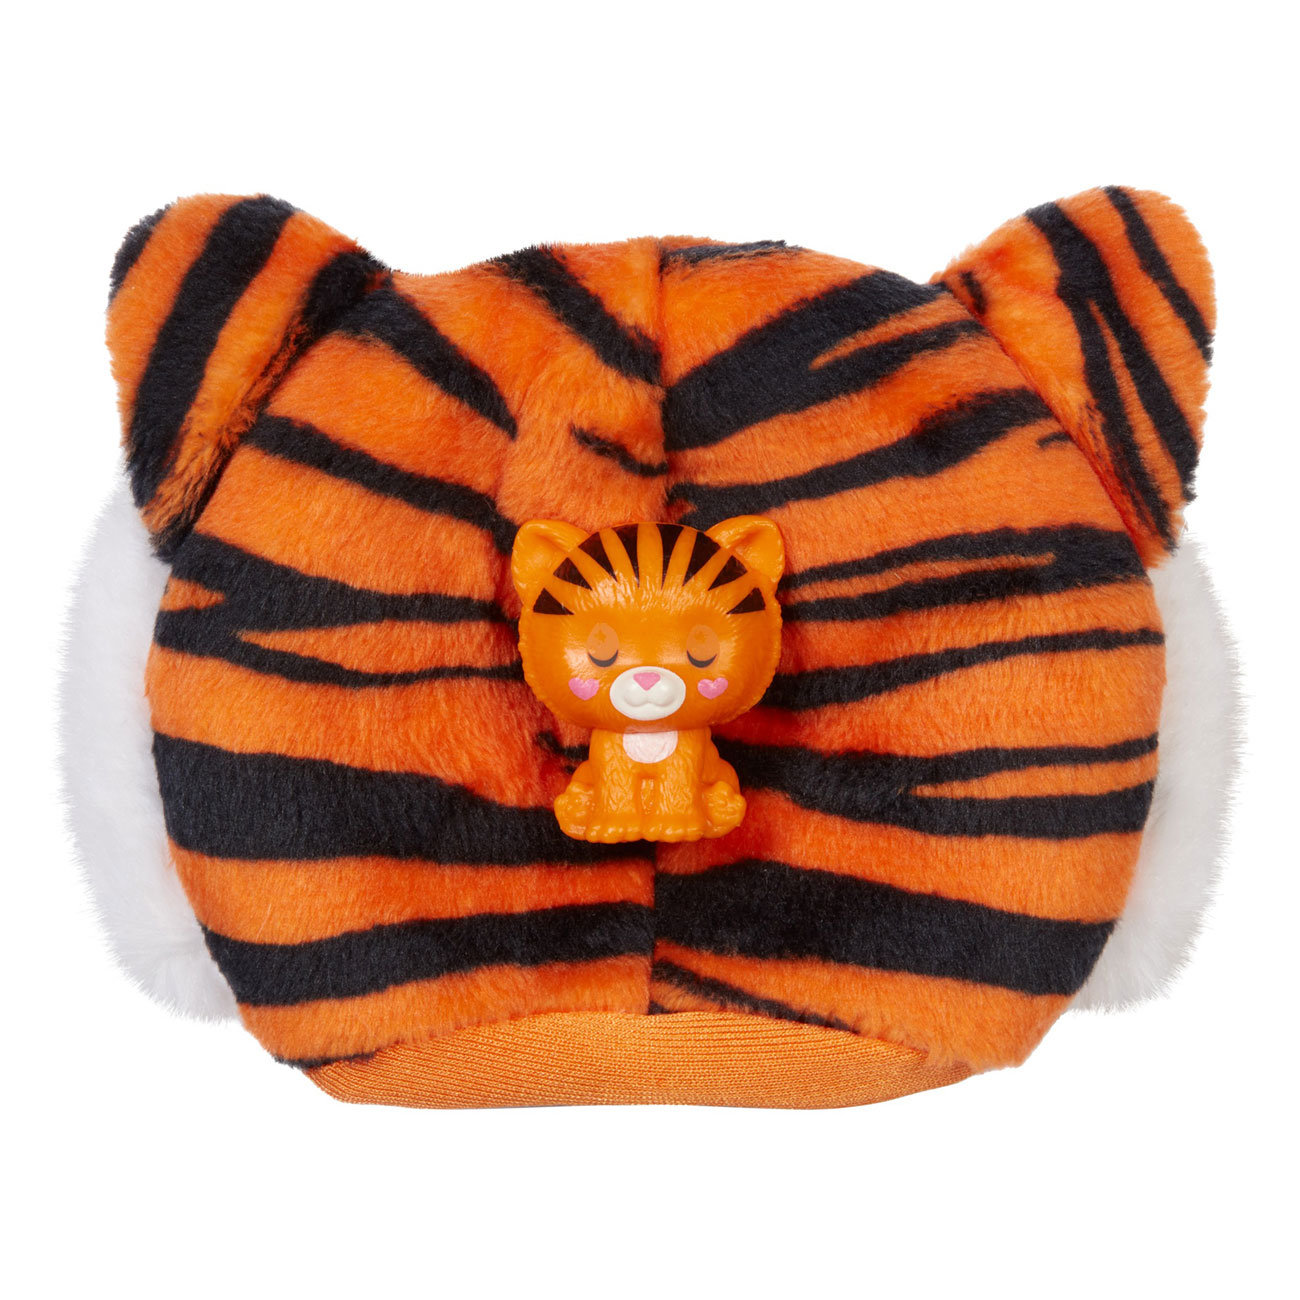  Barbie Small Dolls and Accessories, Cutie Reveal Chelsea Doll  with Tiger Plush Costume & 7 Surprises Including Color Change, Jungle  Series : Toys & Games